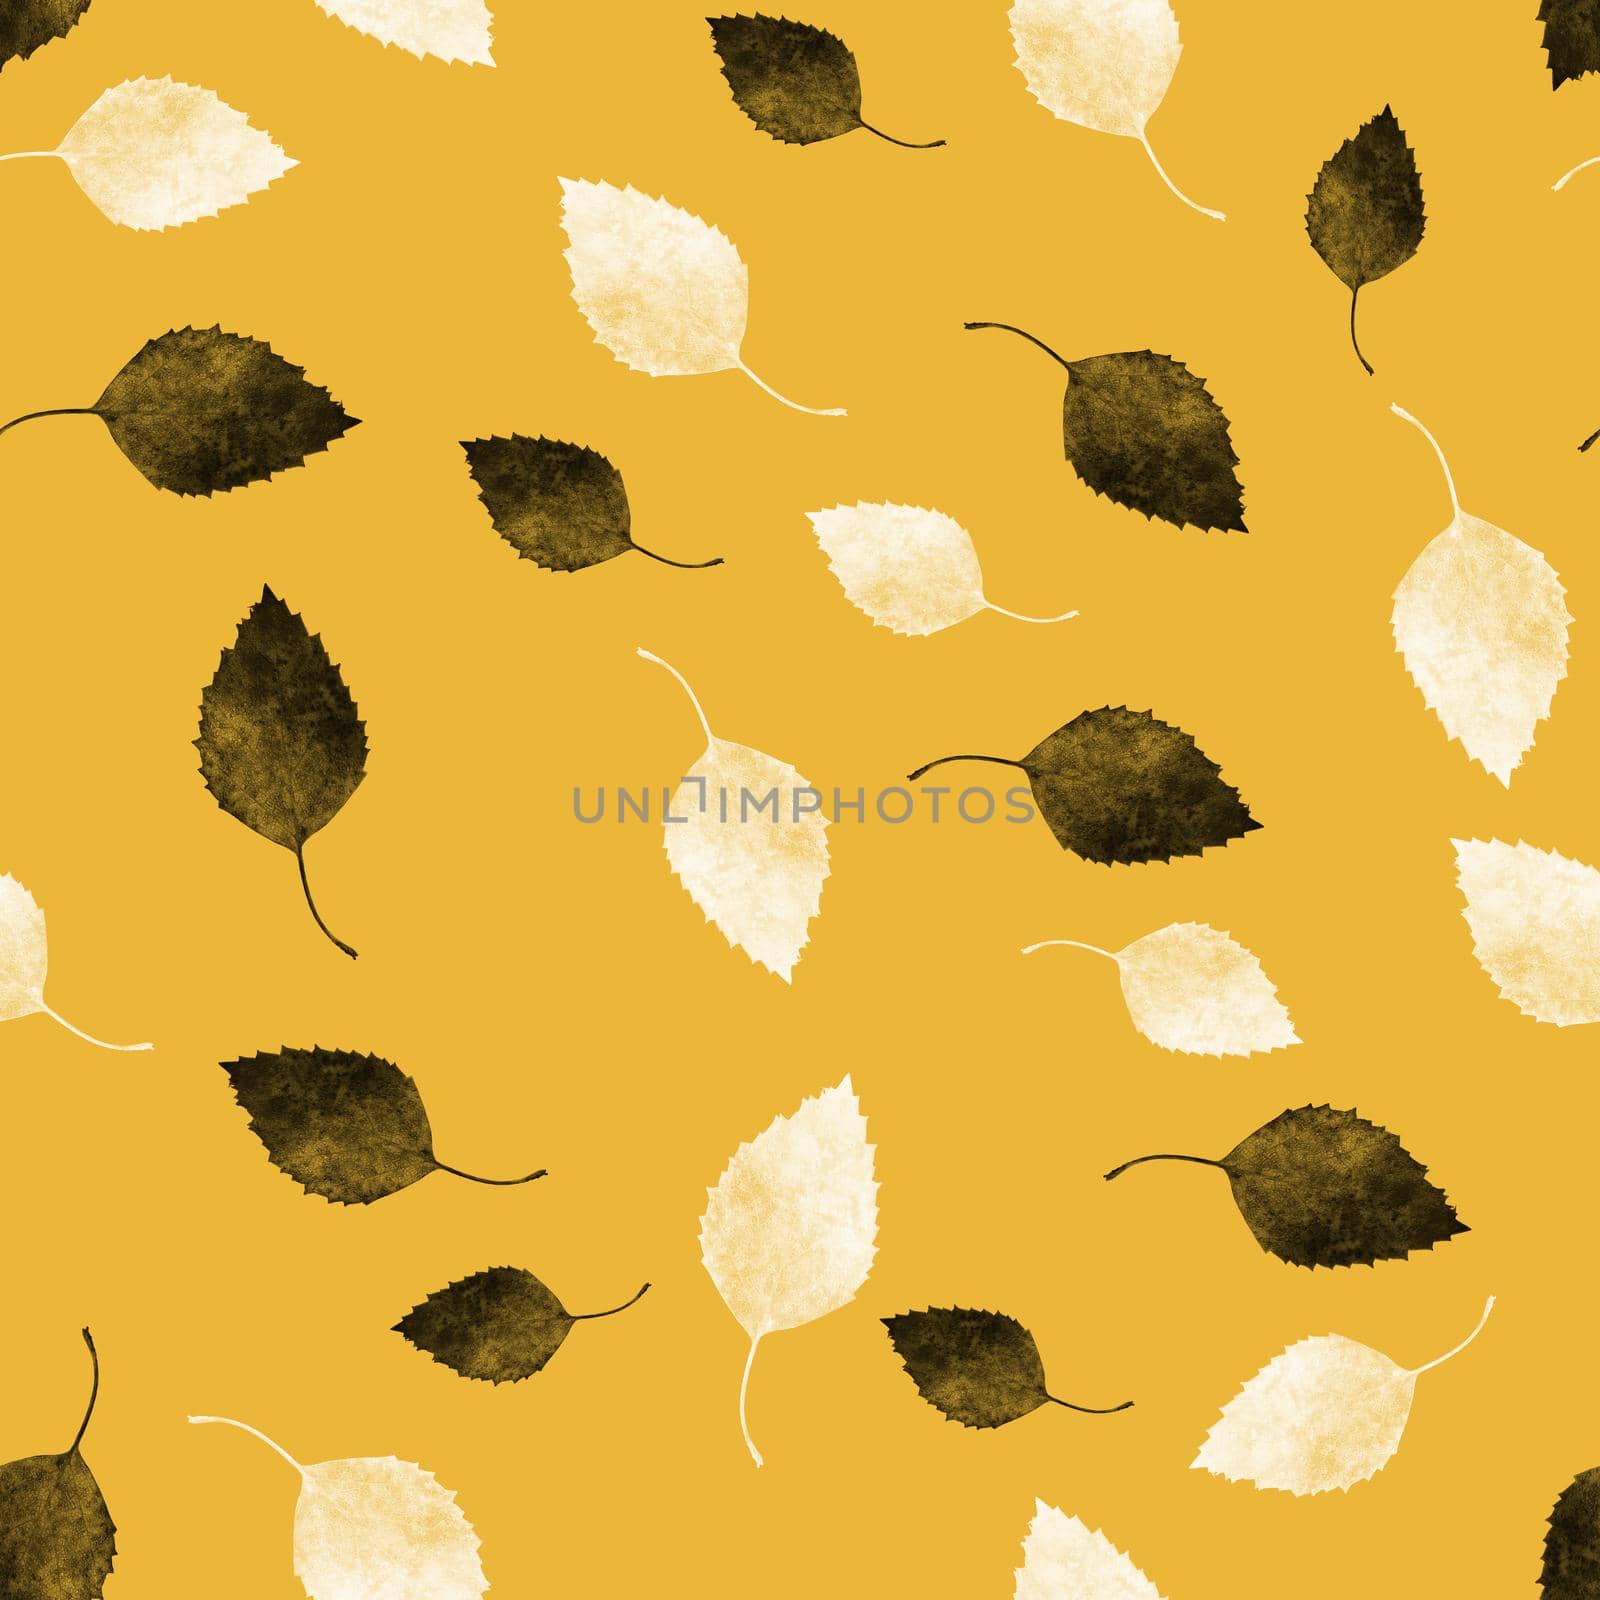 black and white vintage screen print effect leaves seamless pattern on a yellow mid century colored background